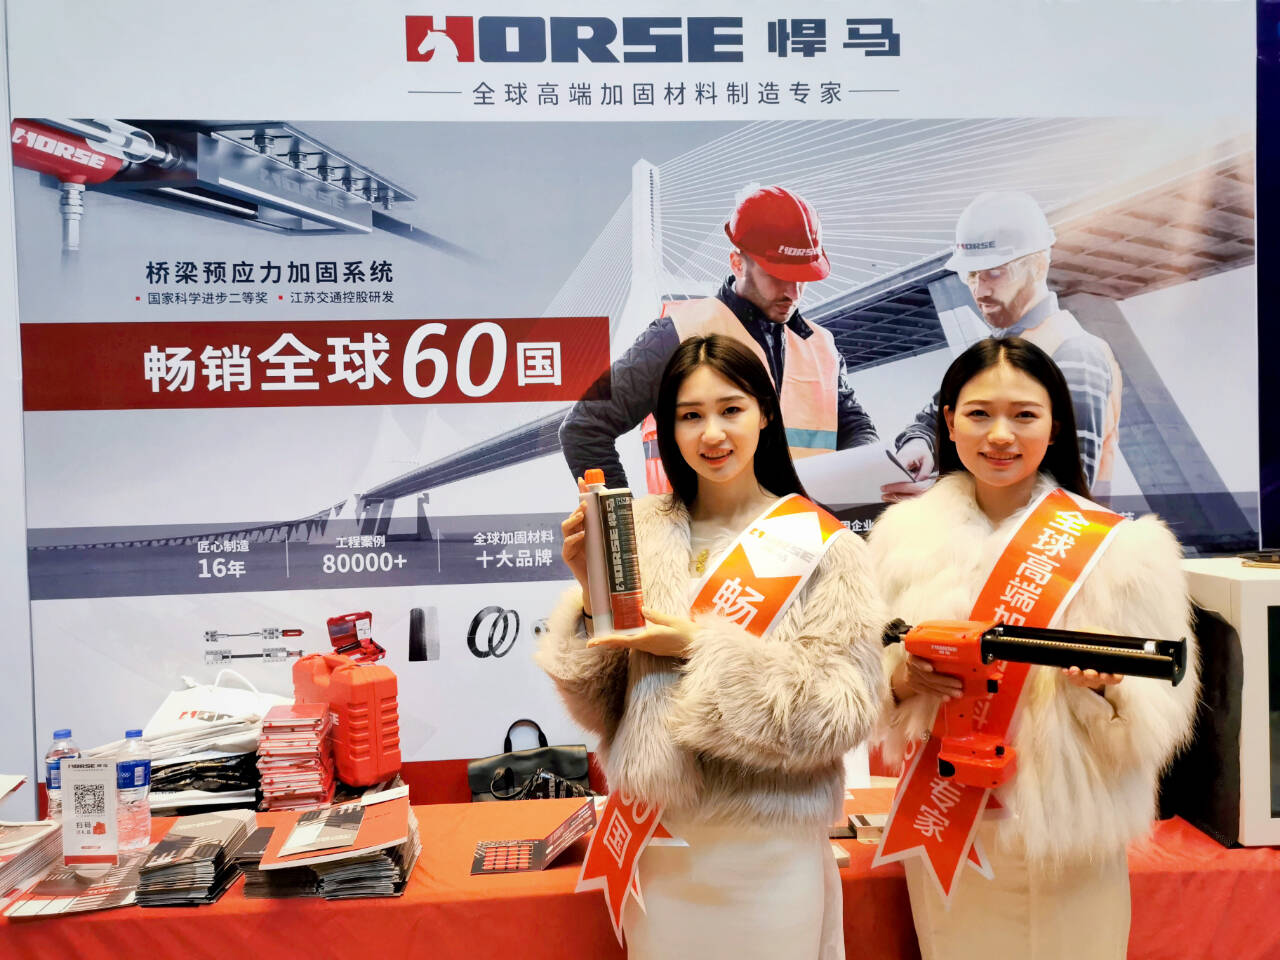 Shanghai Horse Construction's New Year Exhibition Debut